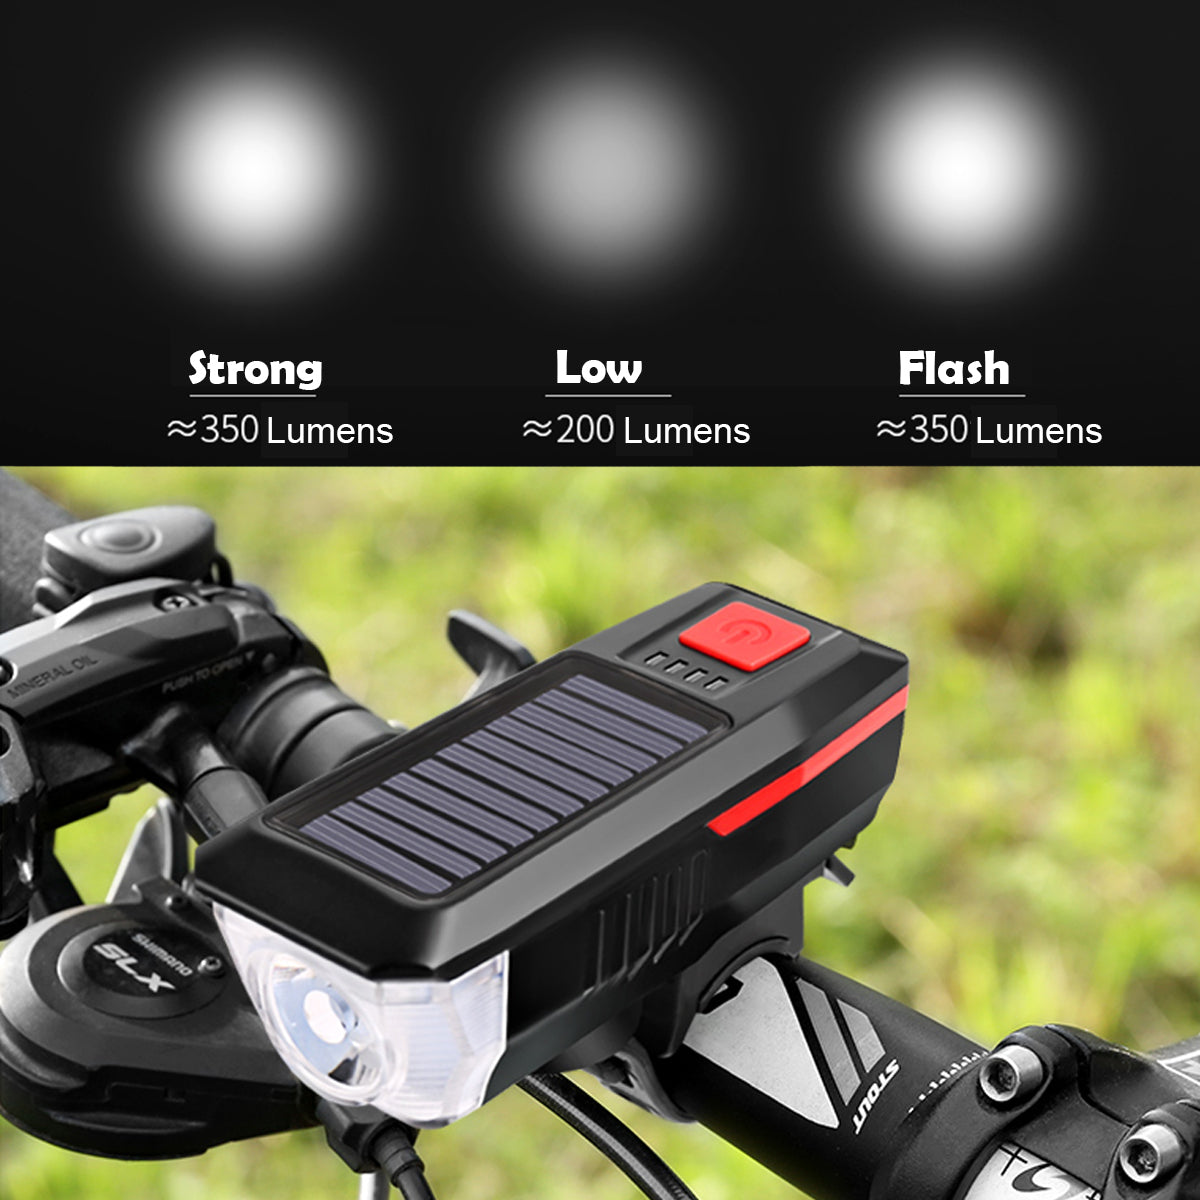 Solar Power Bicycle Motorcycle Headlights Ring Bell Light Waterproof Rechargeable Lamp